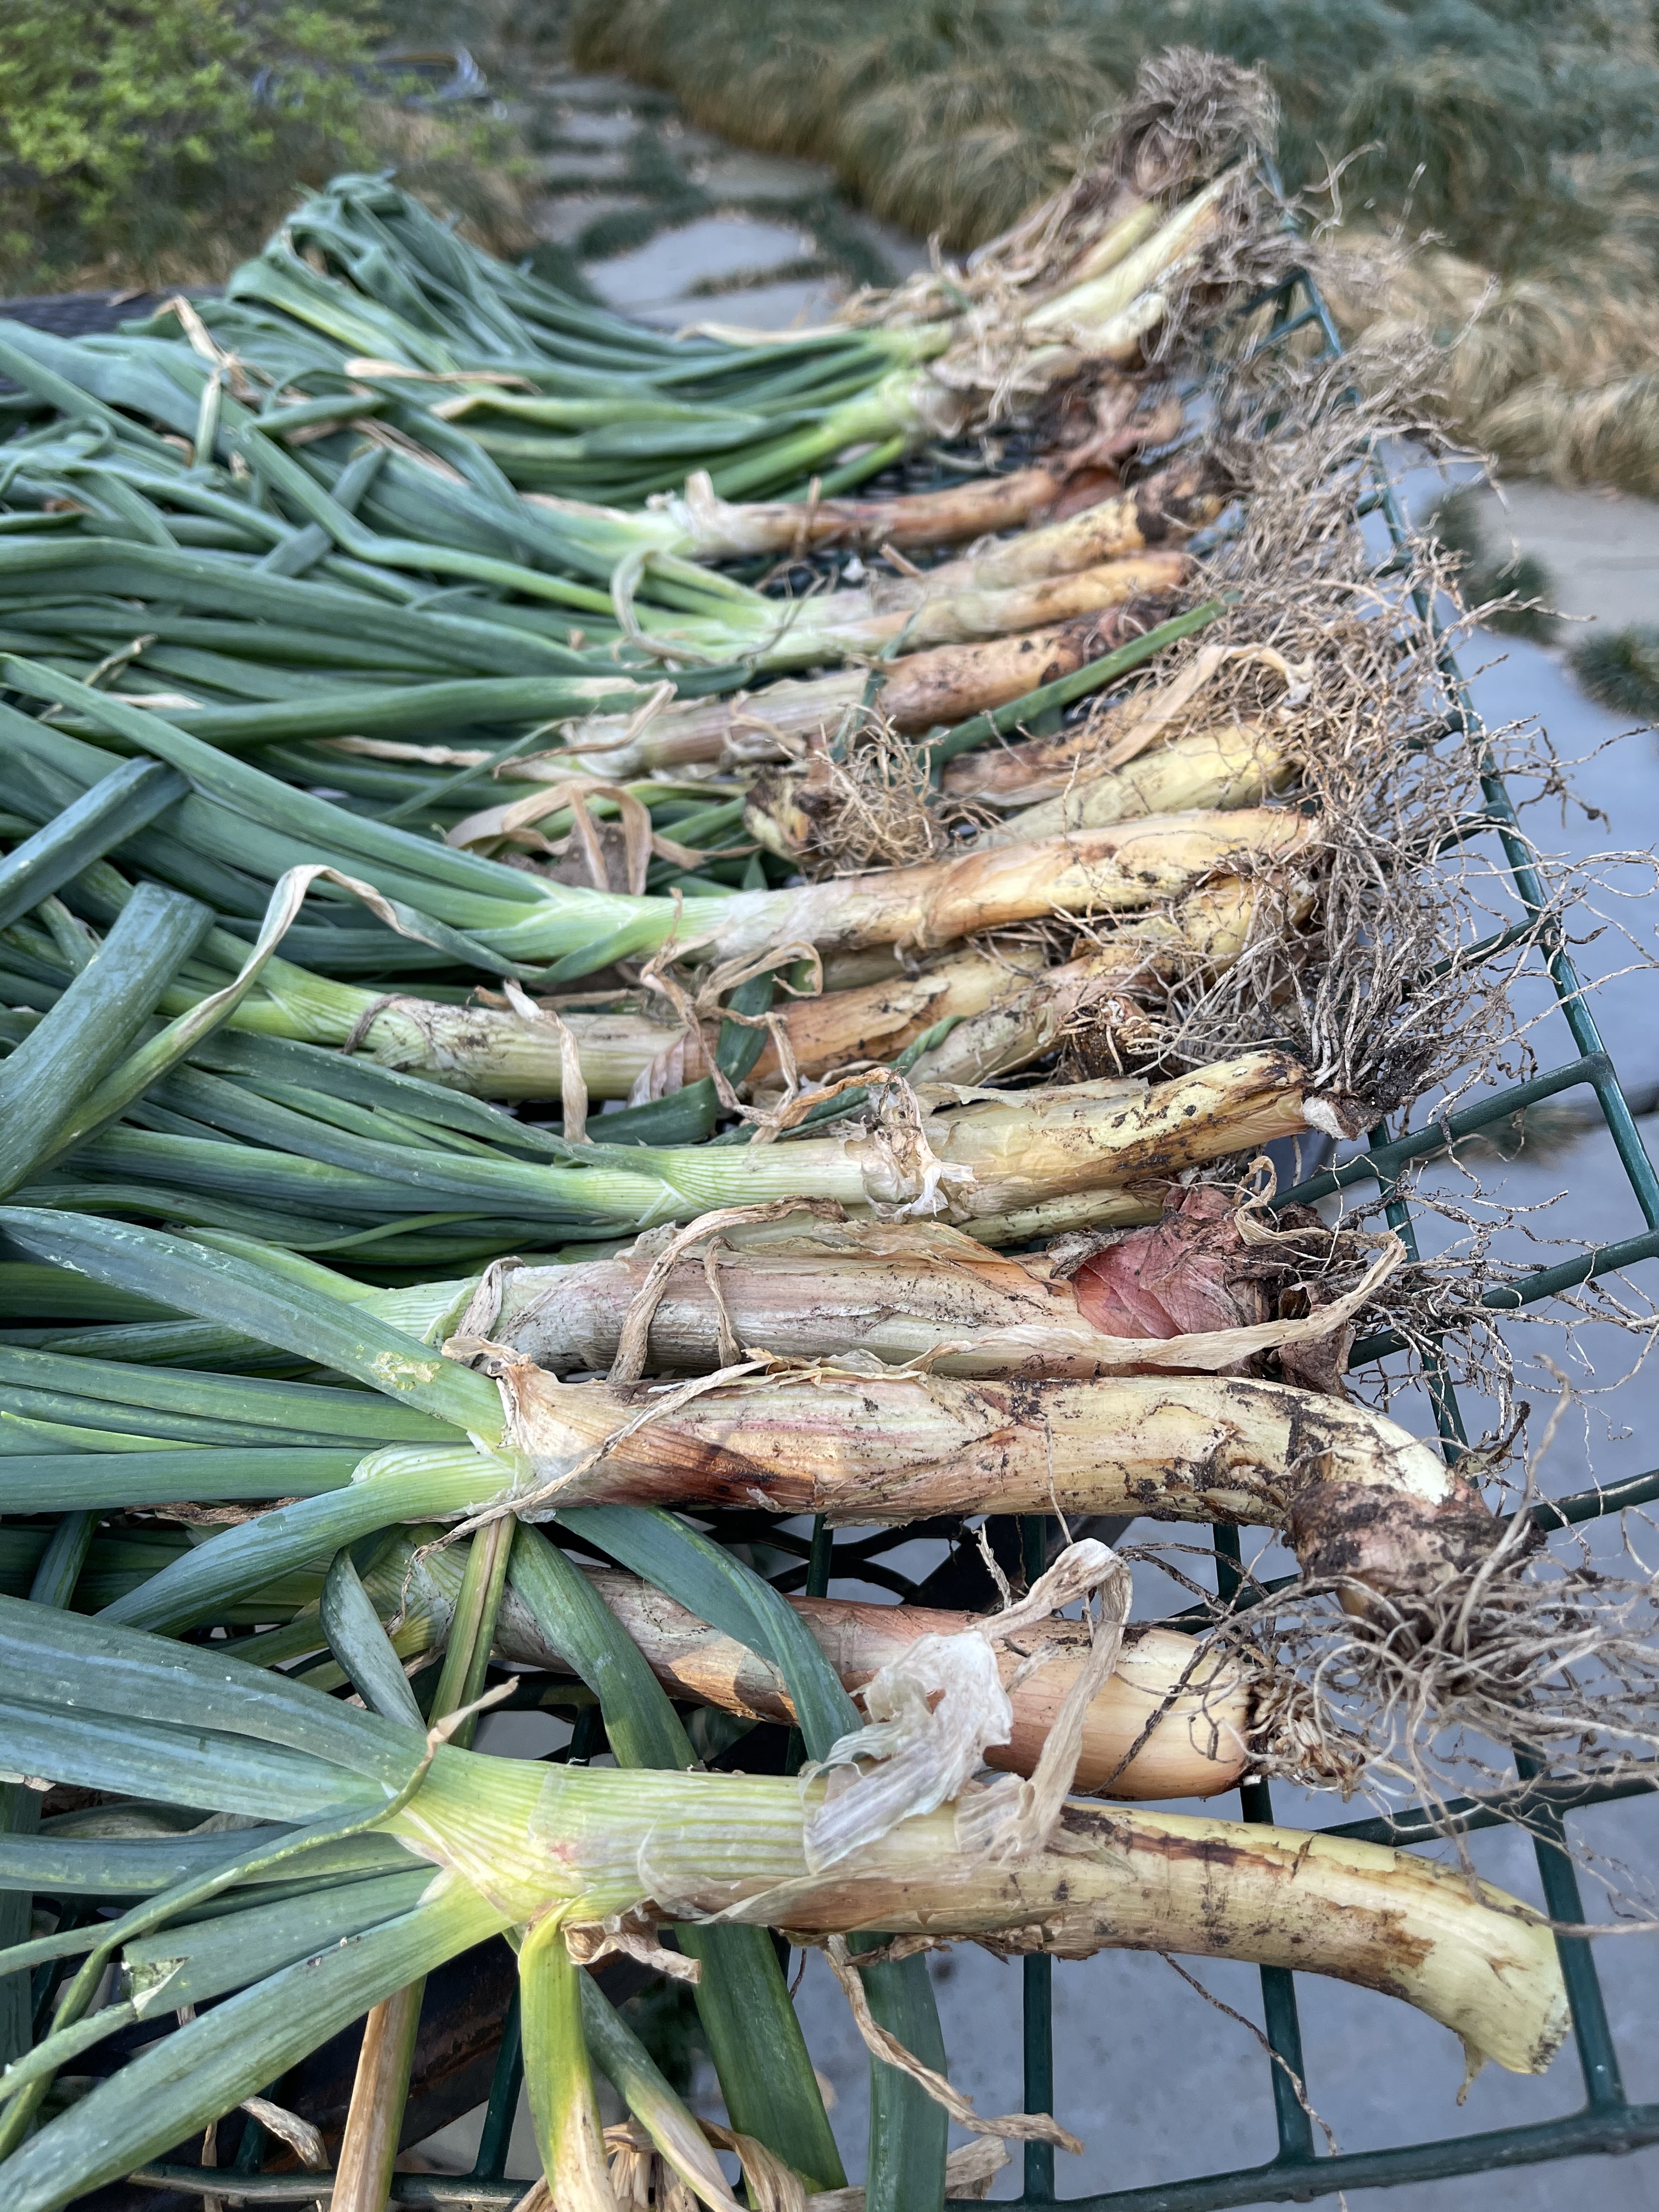 When and How to Harvest Shallots